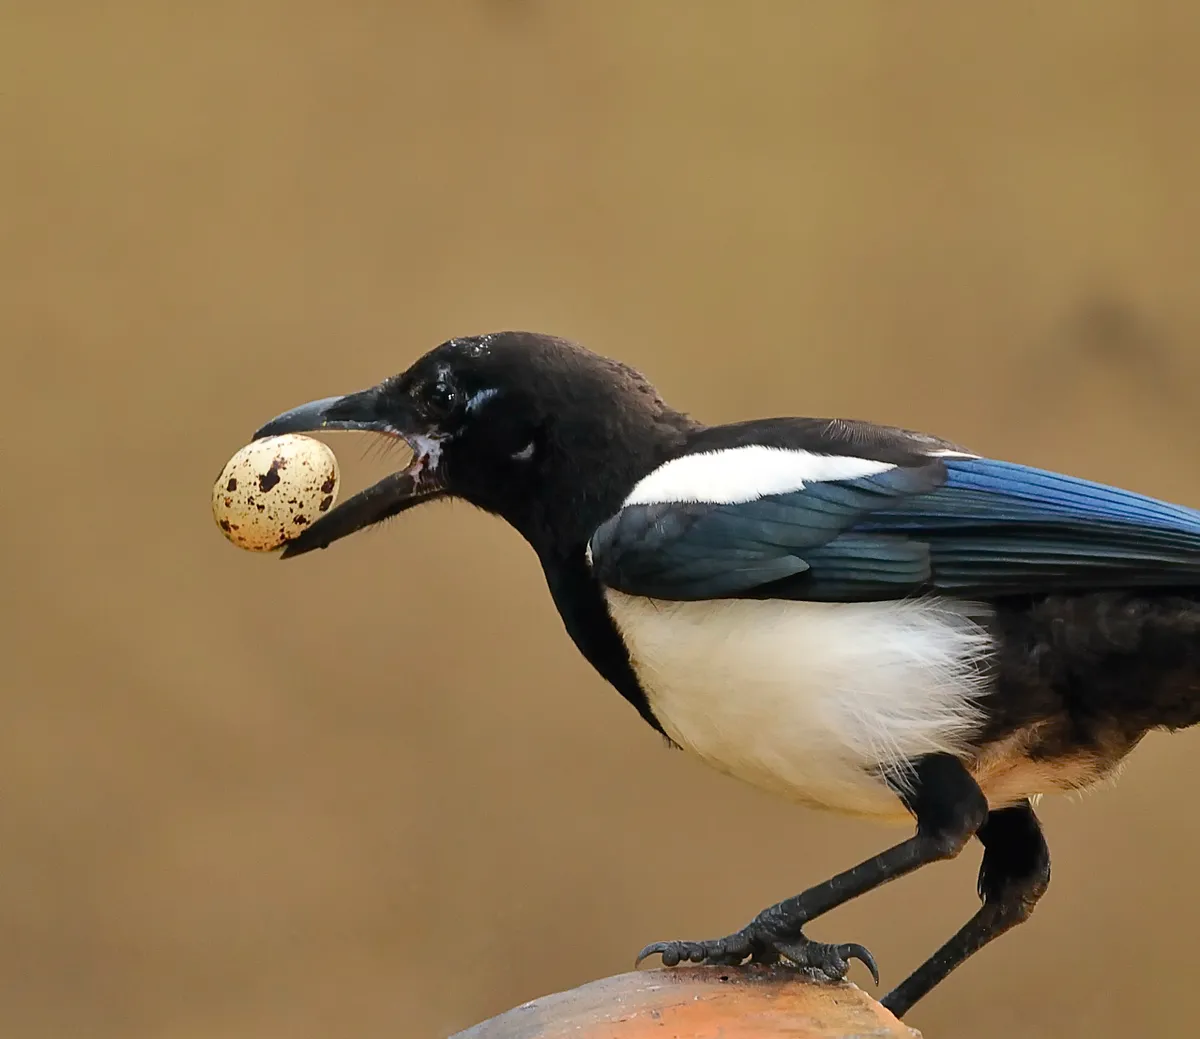 Magpie with a stolen egg in its beak